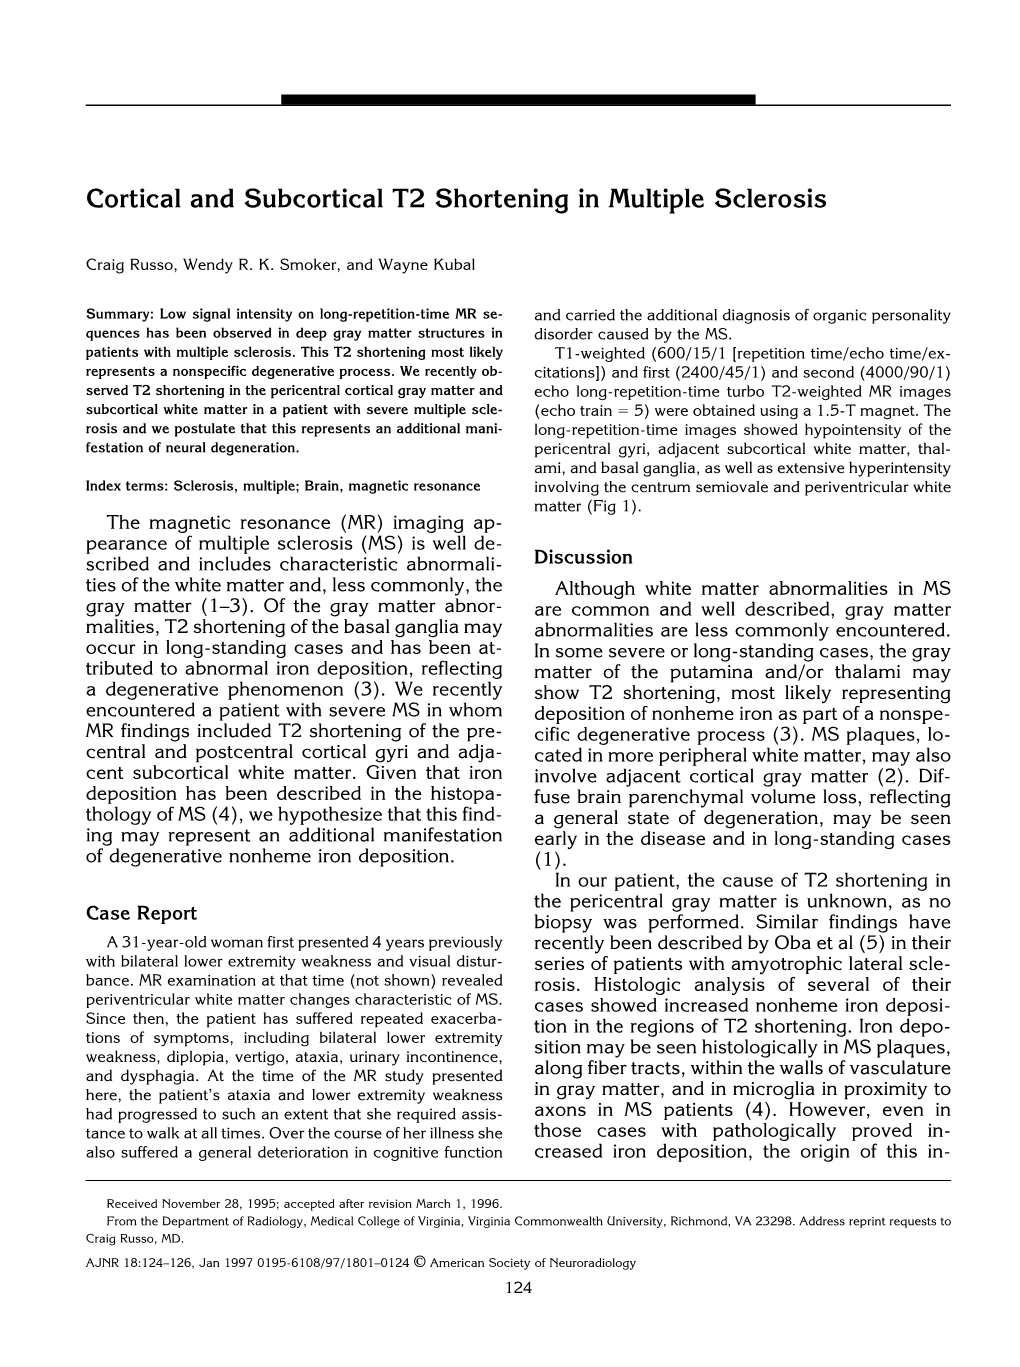 Cortical and Subcortical T2 Shortening in Multiple Sclerosis